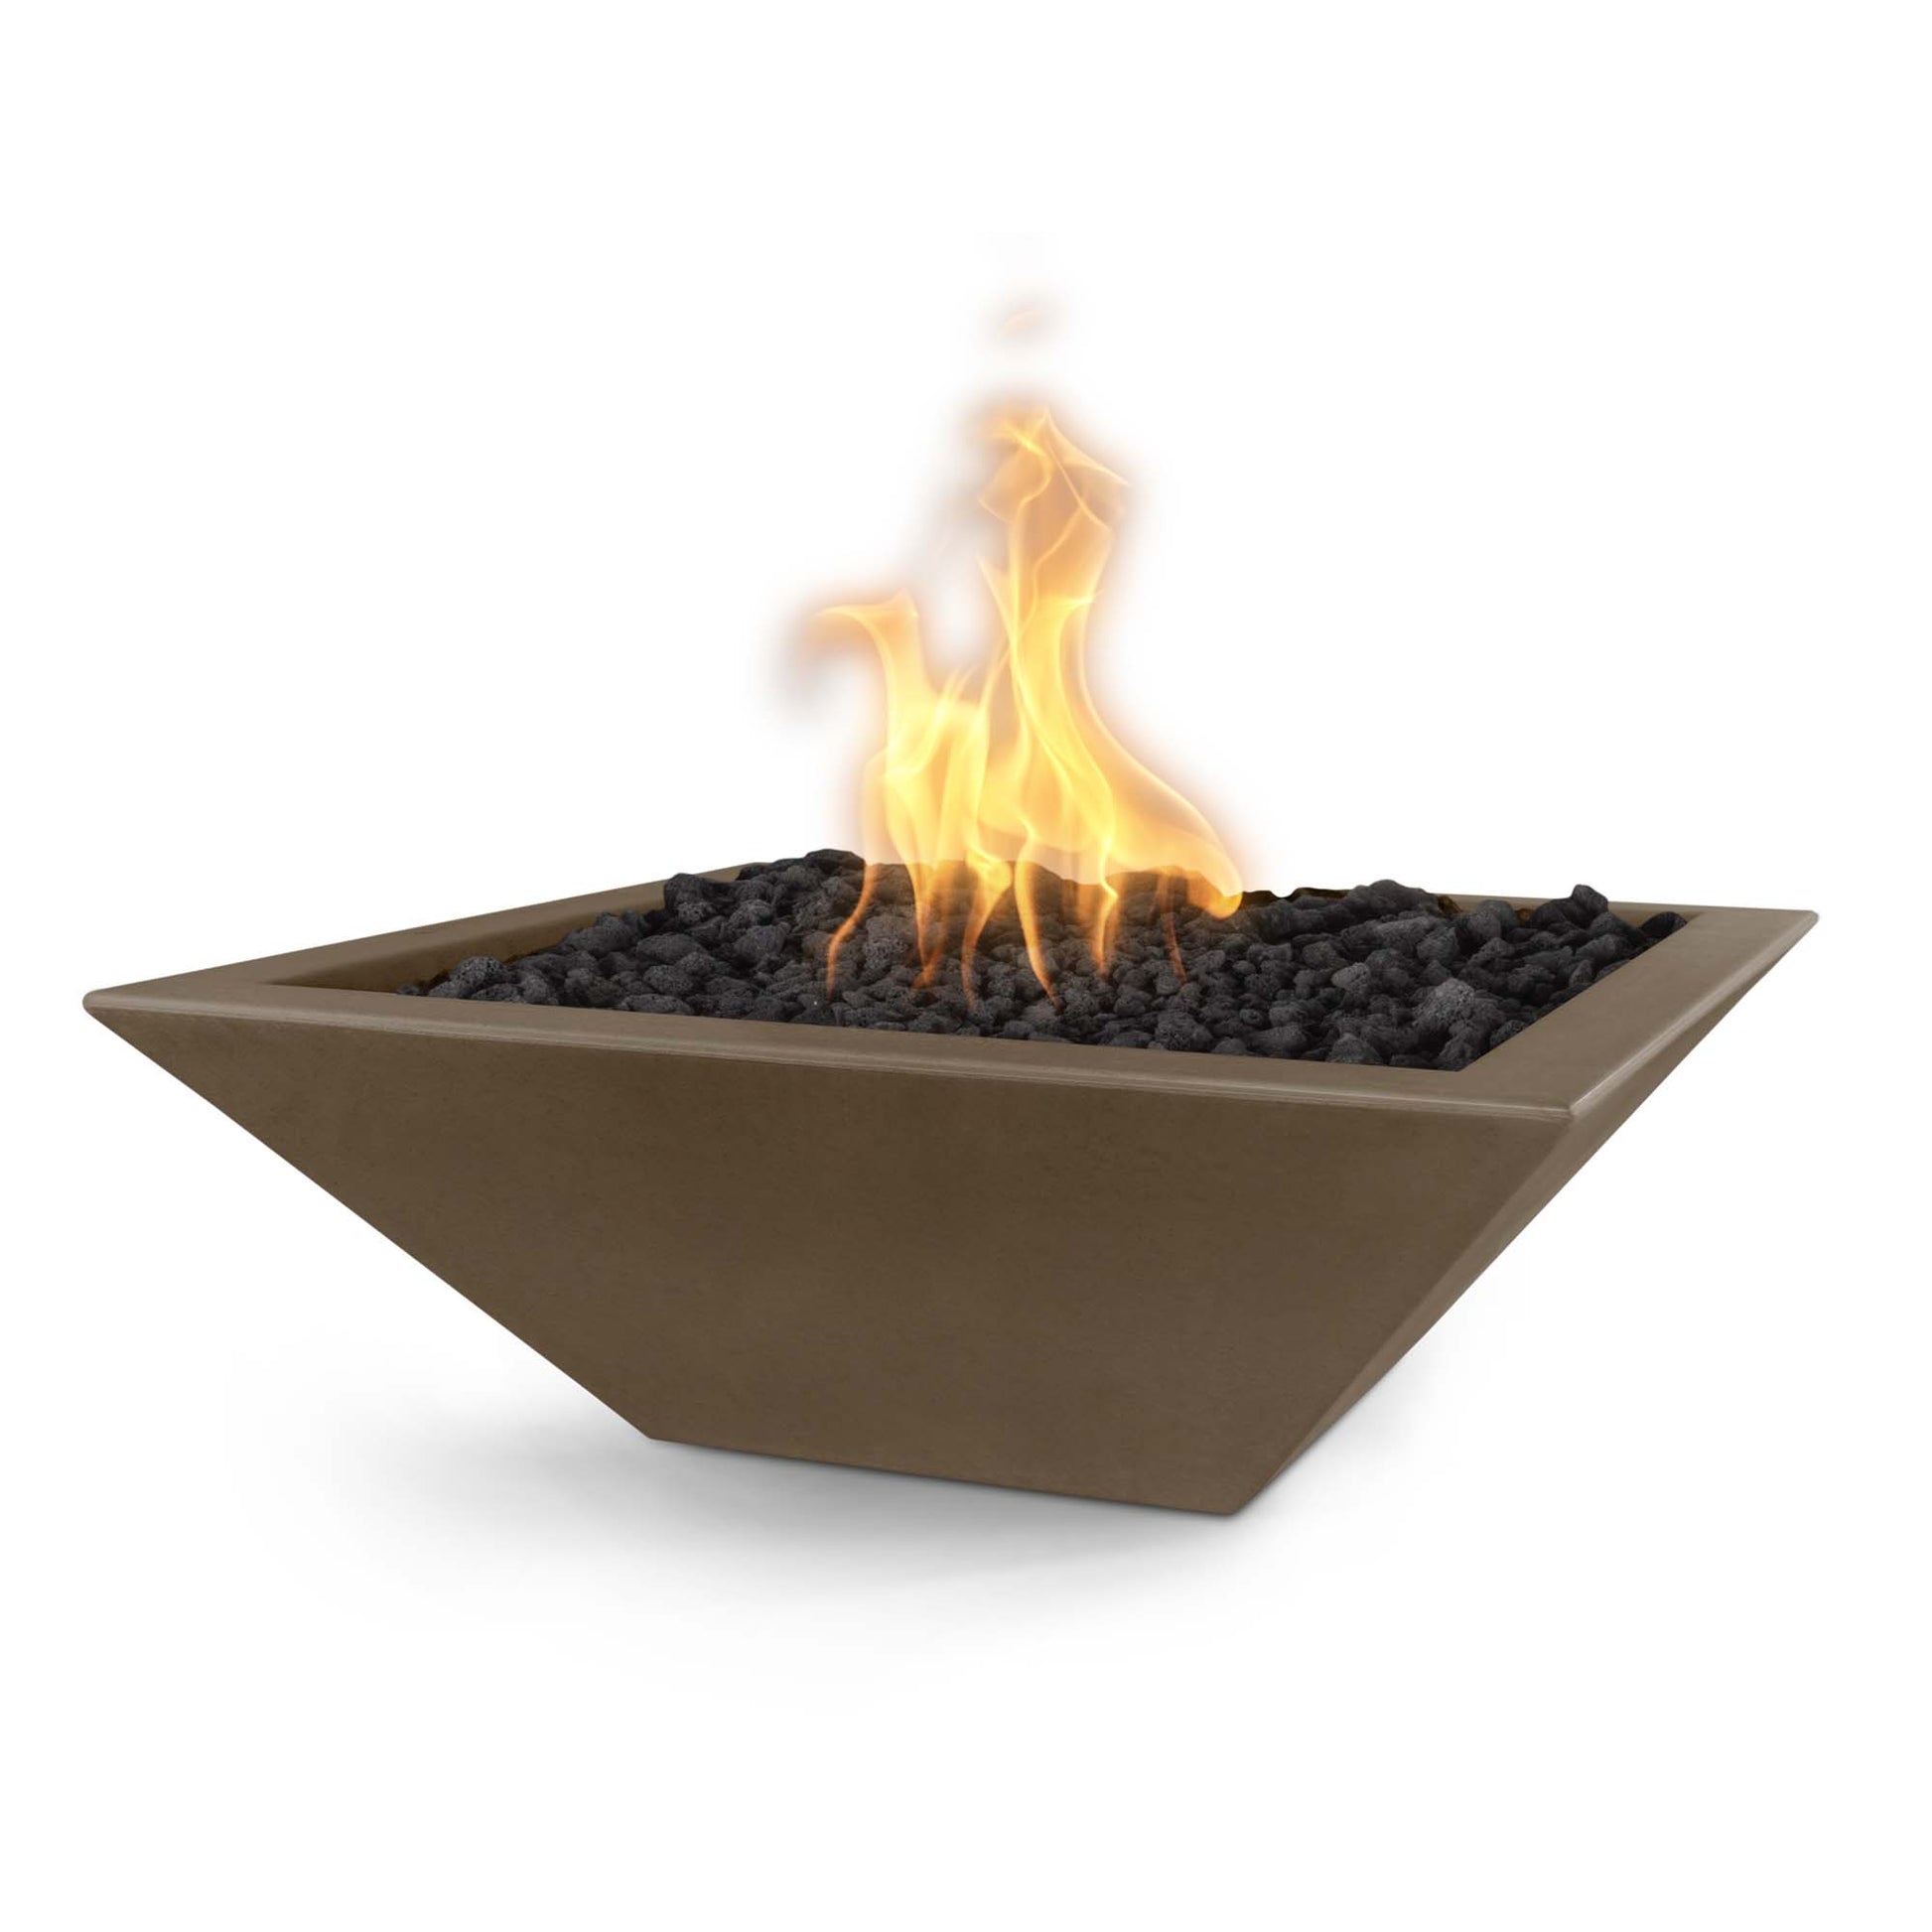 The Outdoor Plus Square Maya 24" Chocolate GFRC Concrete Natural Gas Fire Bowl with Match Lit with Flame Sense Ignition